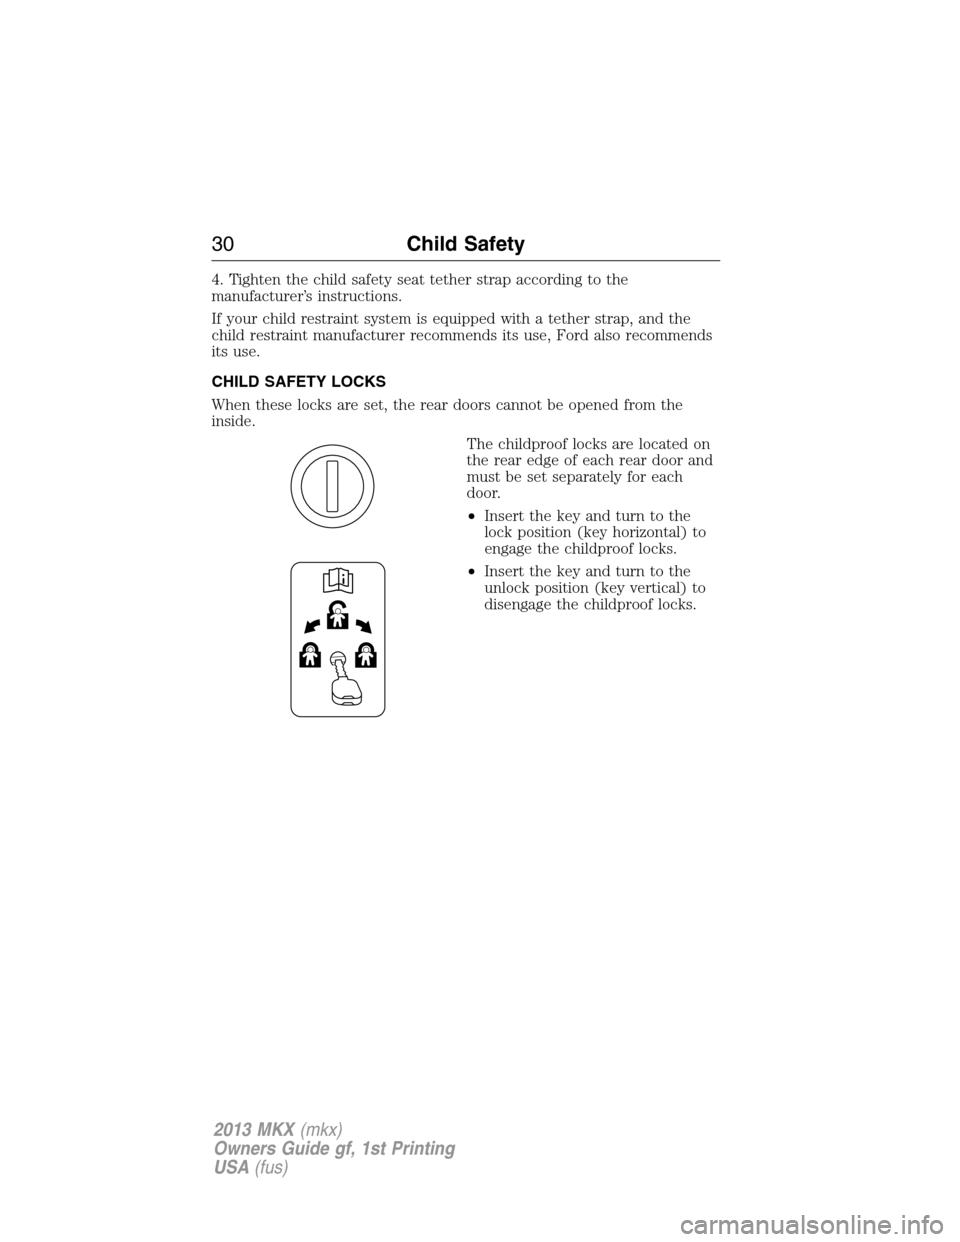 LINCOLN MKX 2013  Owners Manual 4. Tighten the child safety seat tether strap according to the
manufacturer’s instructions.
If your child restraint system is equipped with a tether strap, and the
child restraint manufacturer recom